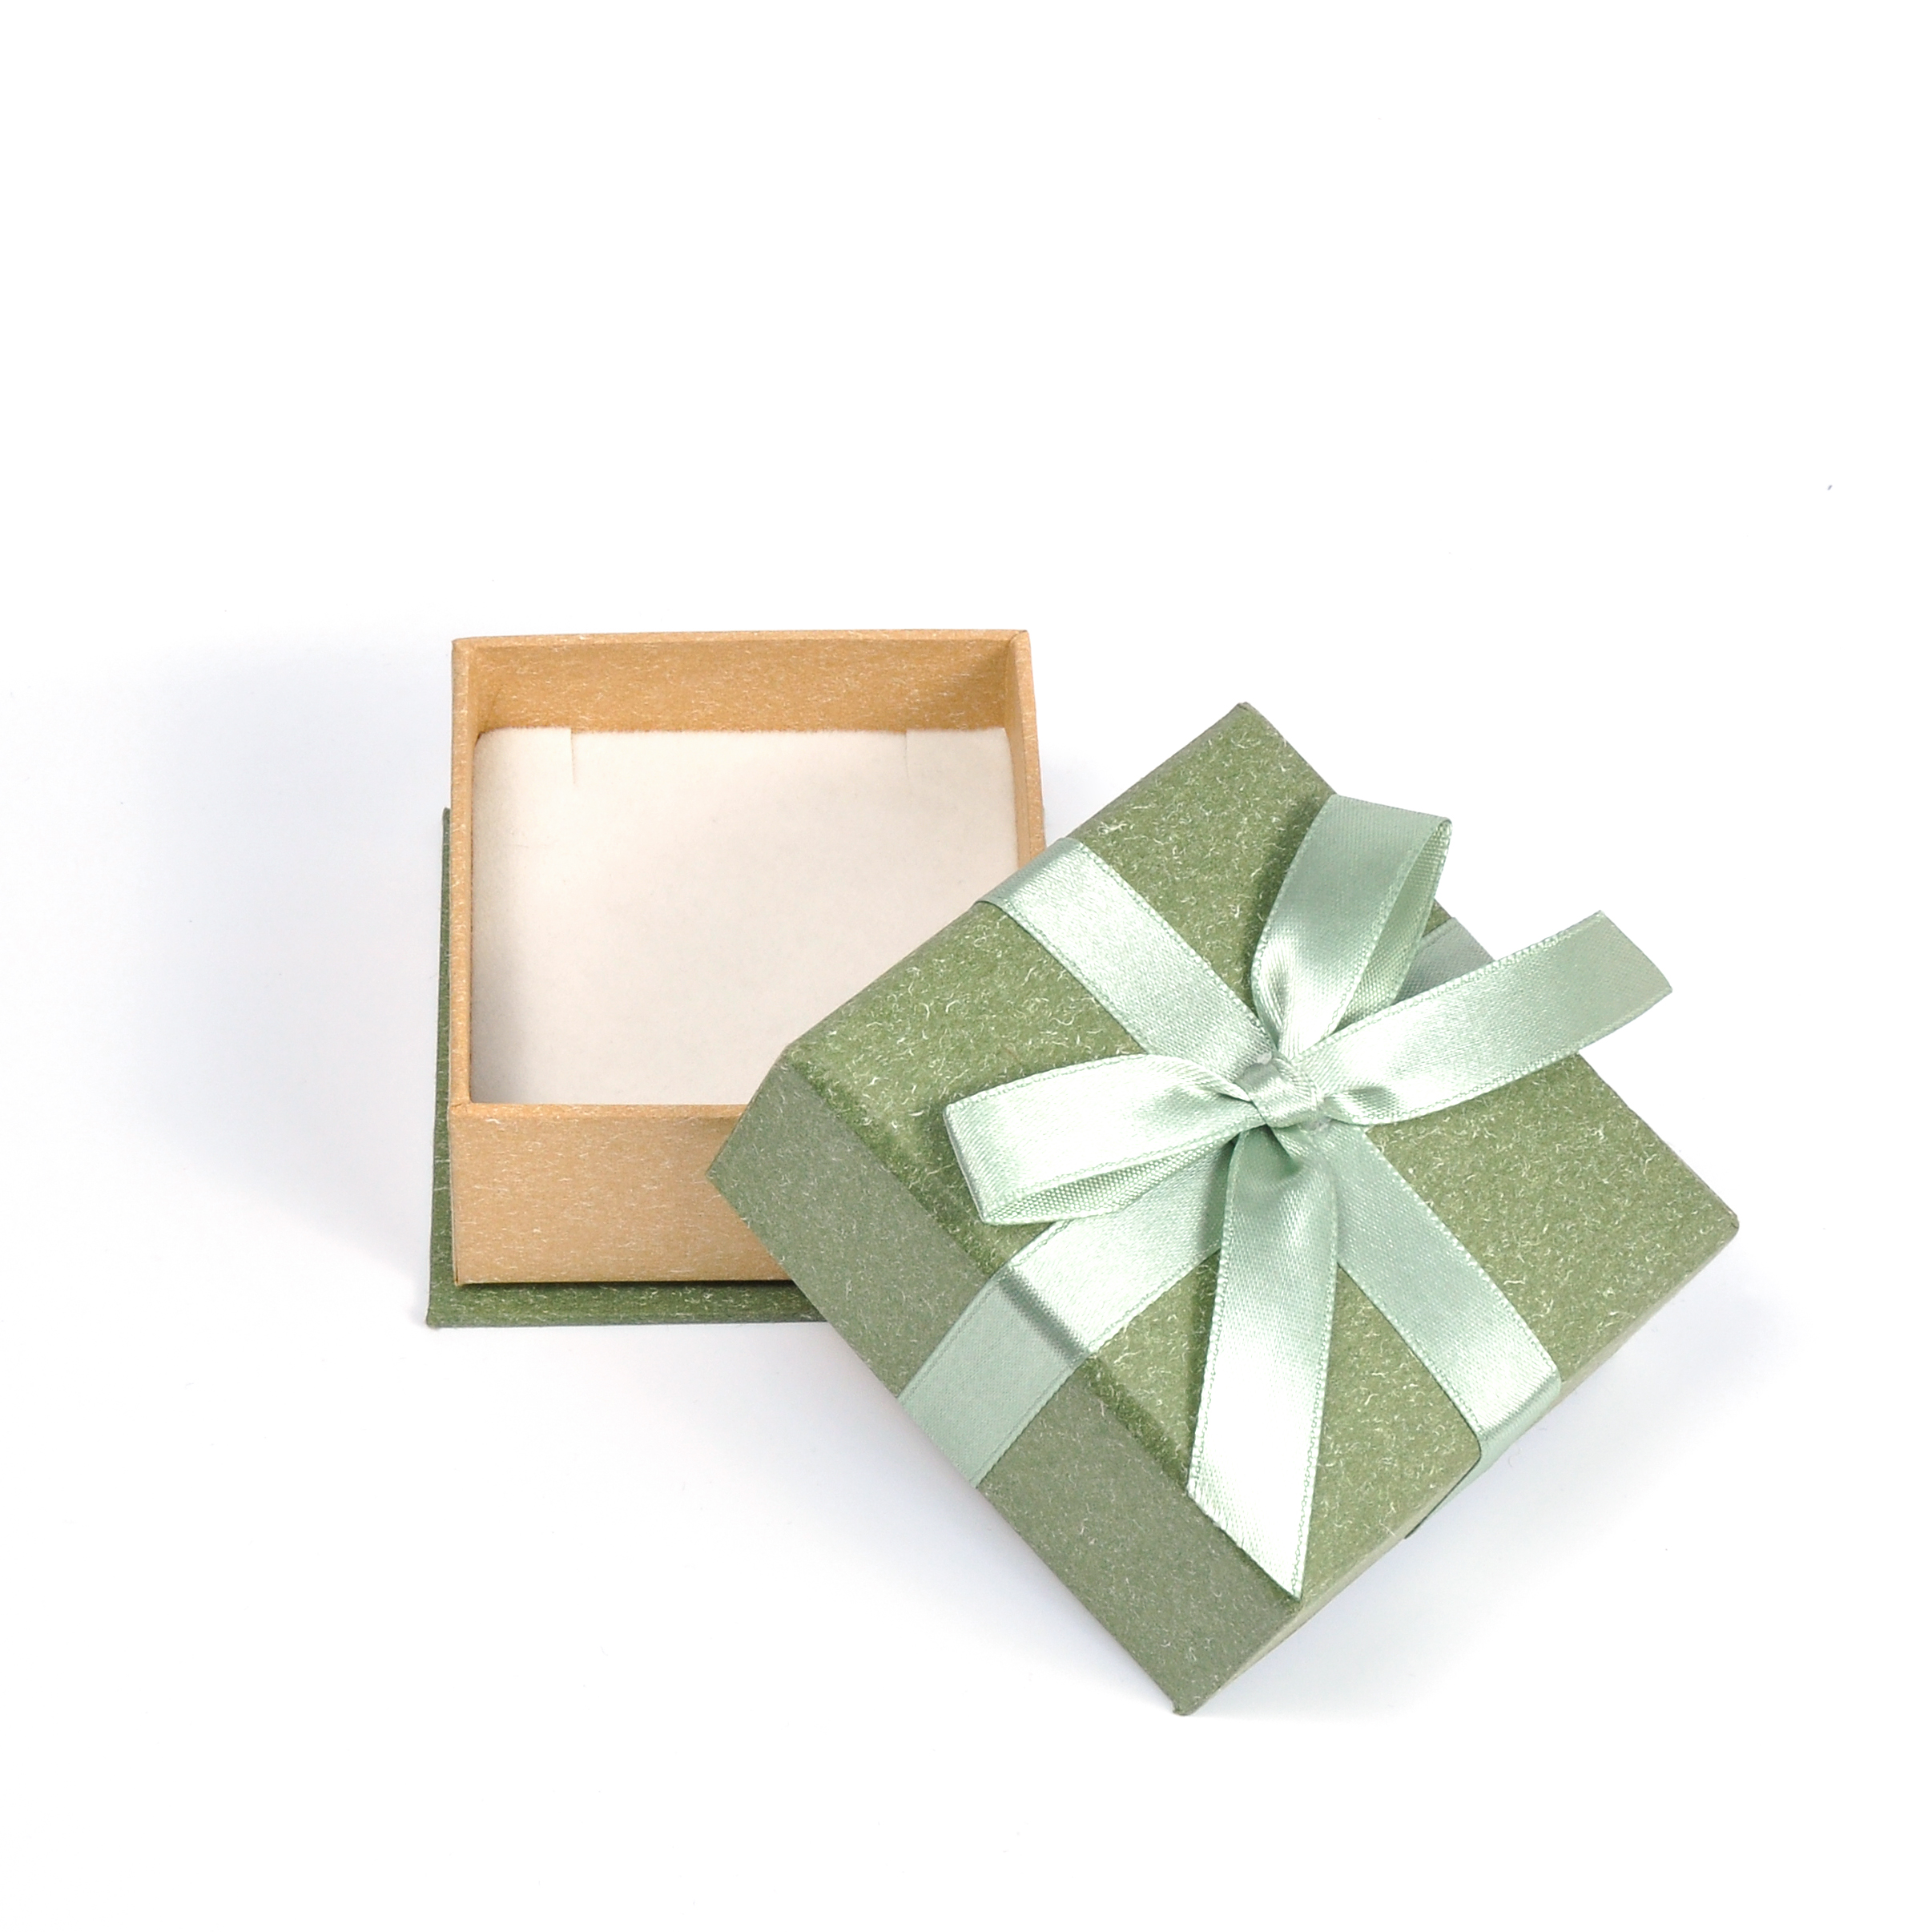 Yadao Design and custom jewelry green paper ring packaging box with sponge pad insert from China manufacture